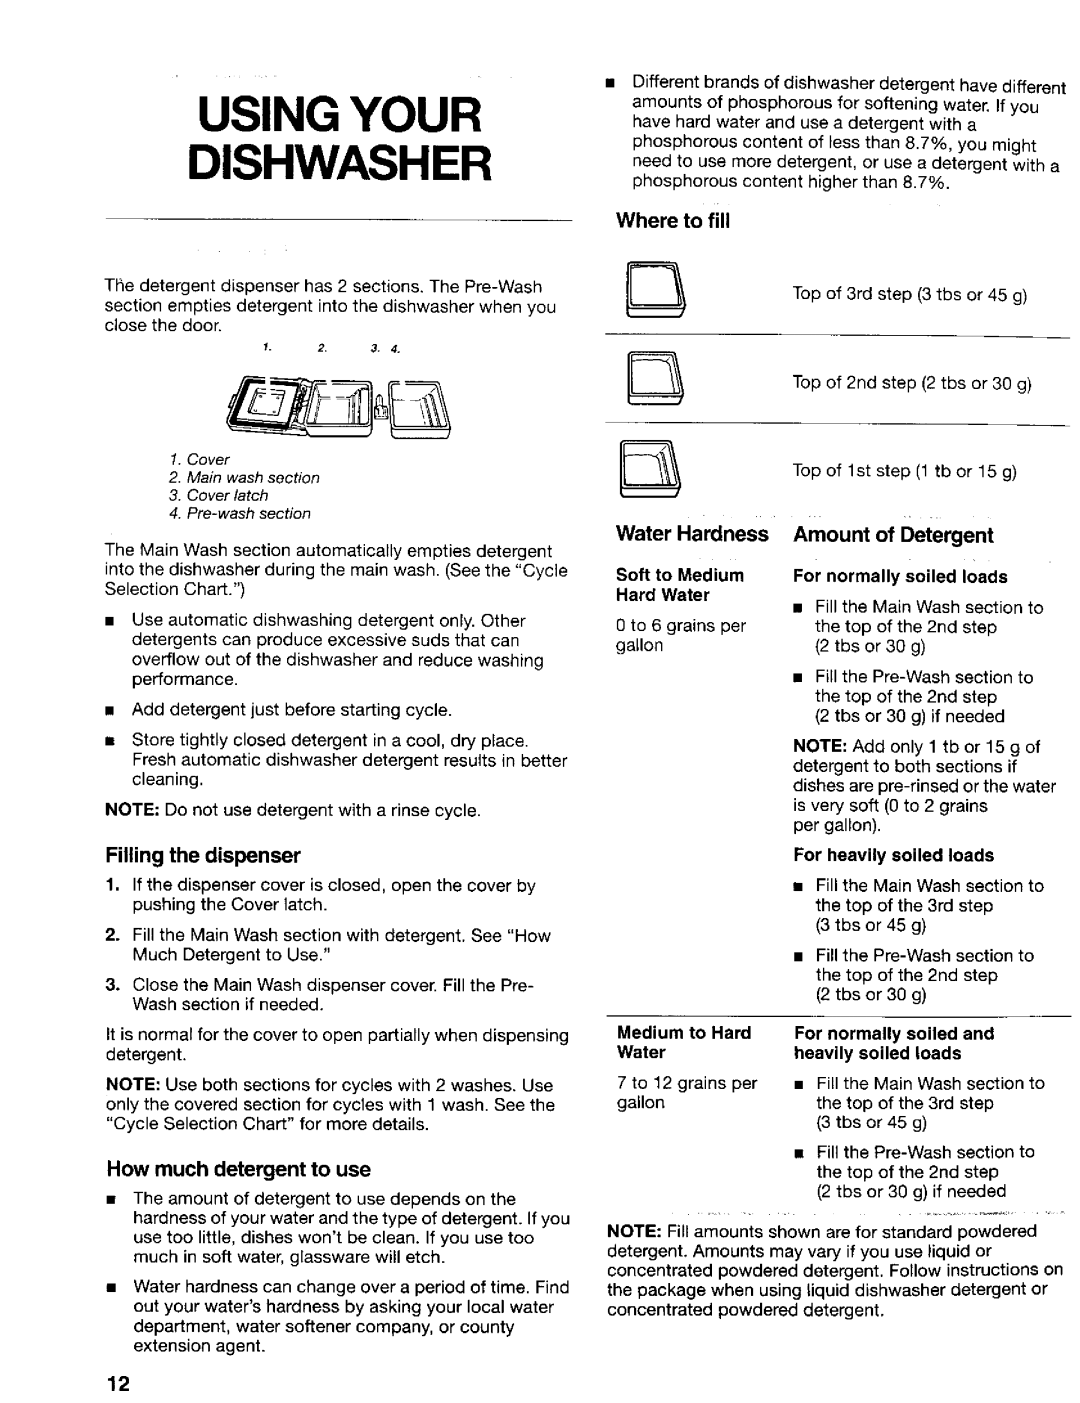 Kenmore 665.17422 Using Your Dishwasher, Where to fill, Filling the dispenser, How much detergent to use, Water Hardness 